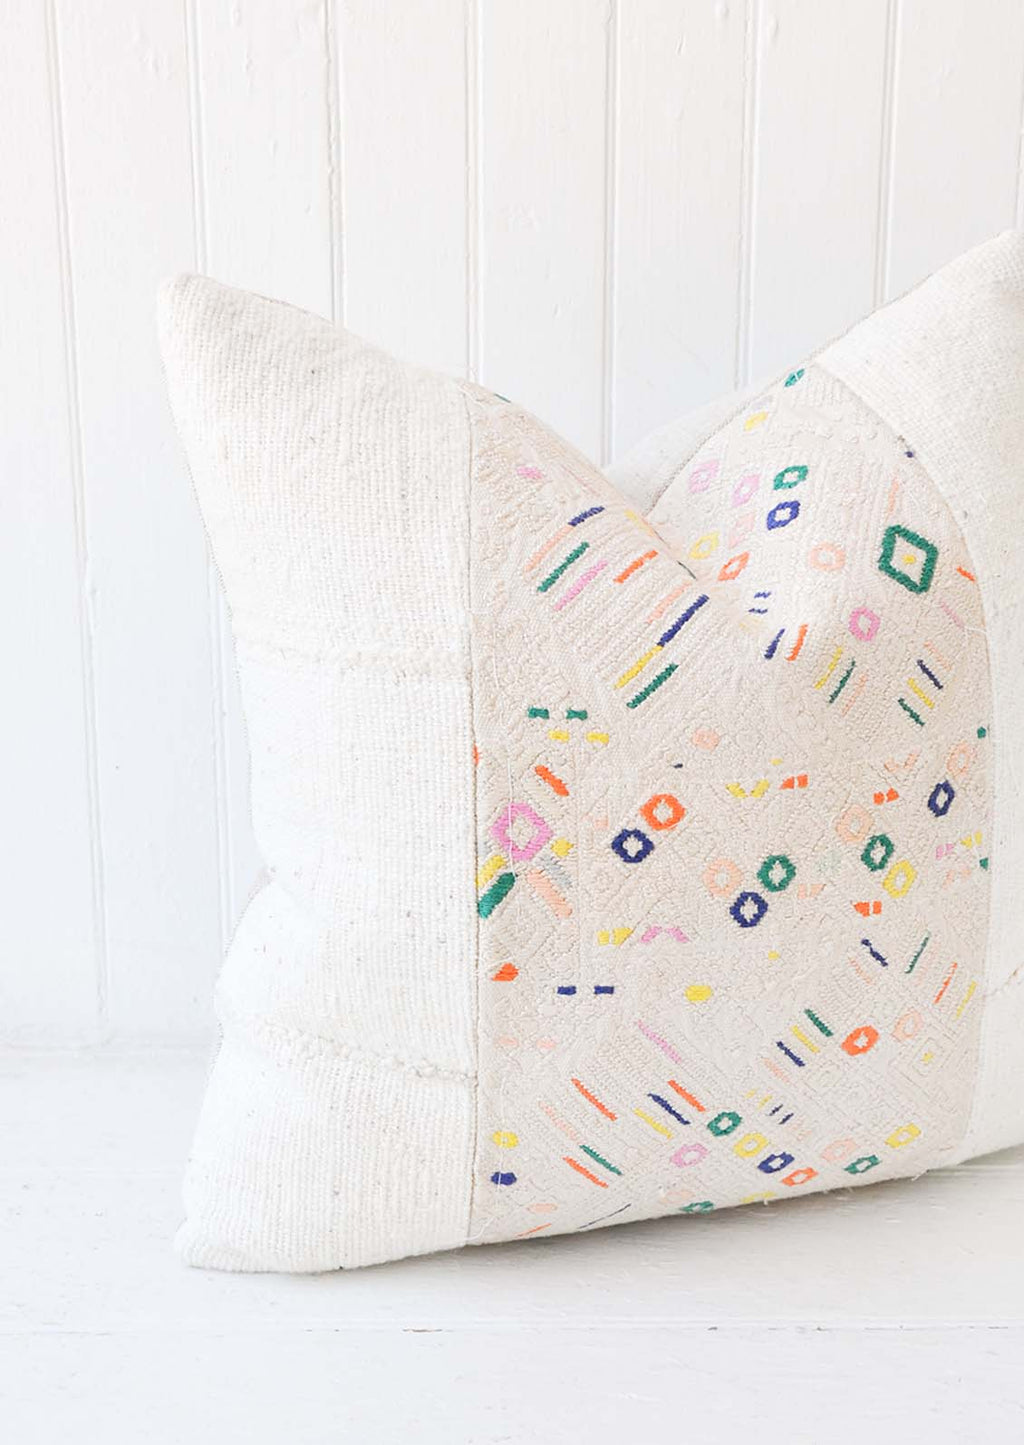 1: A white and multi-colored printed pillow.